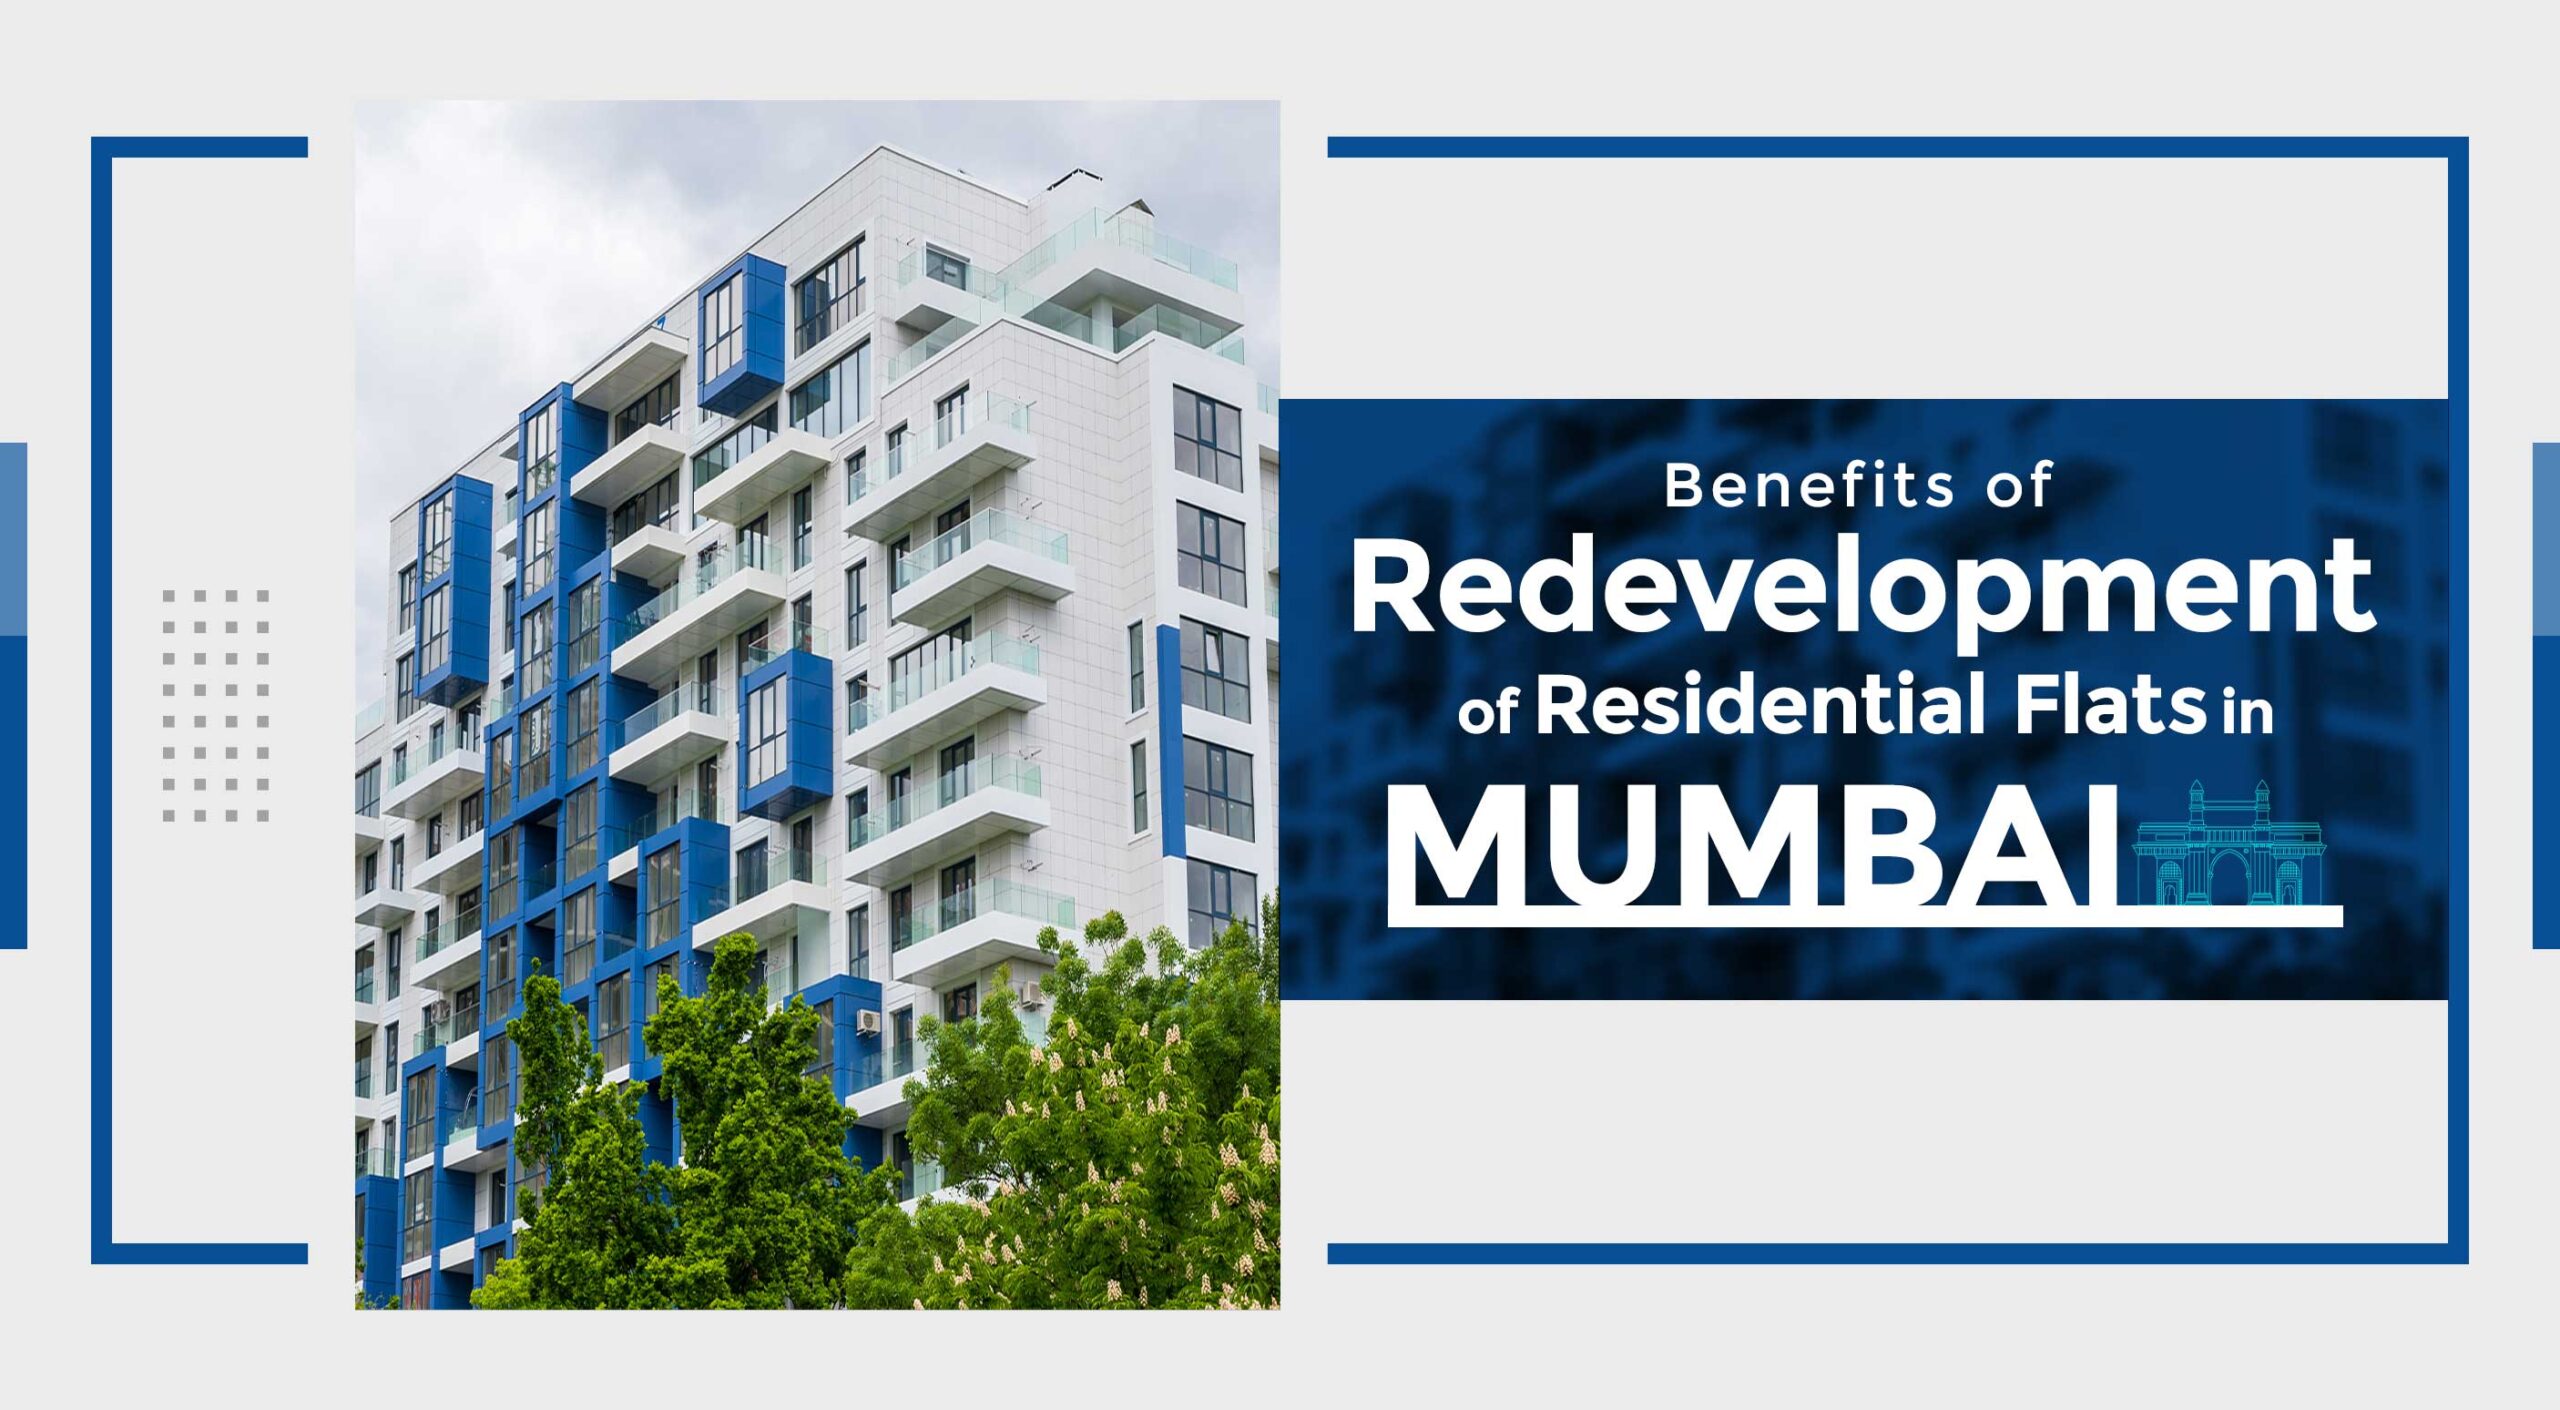 Benefits of Redevelopment of Residential Flats in Mumbai